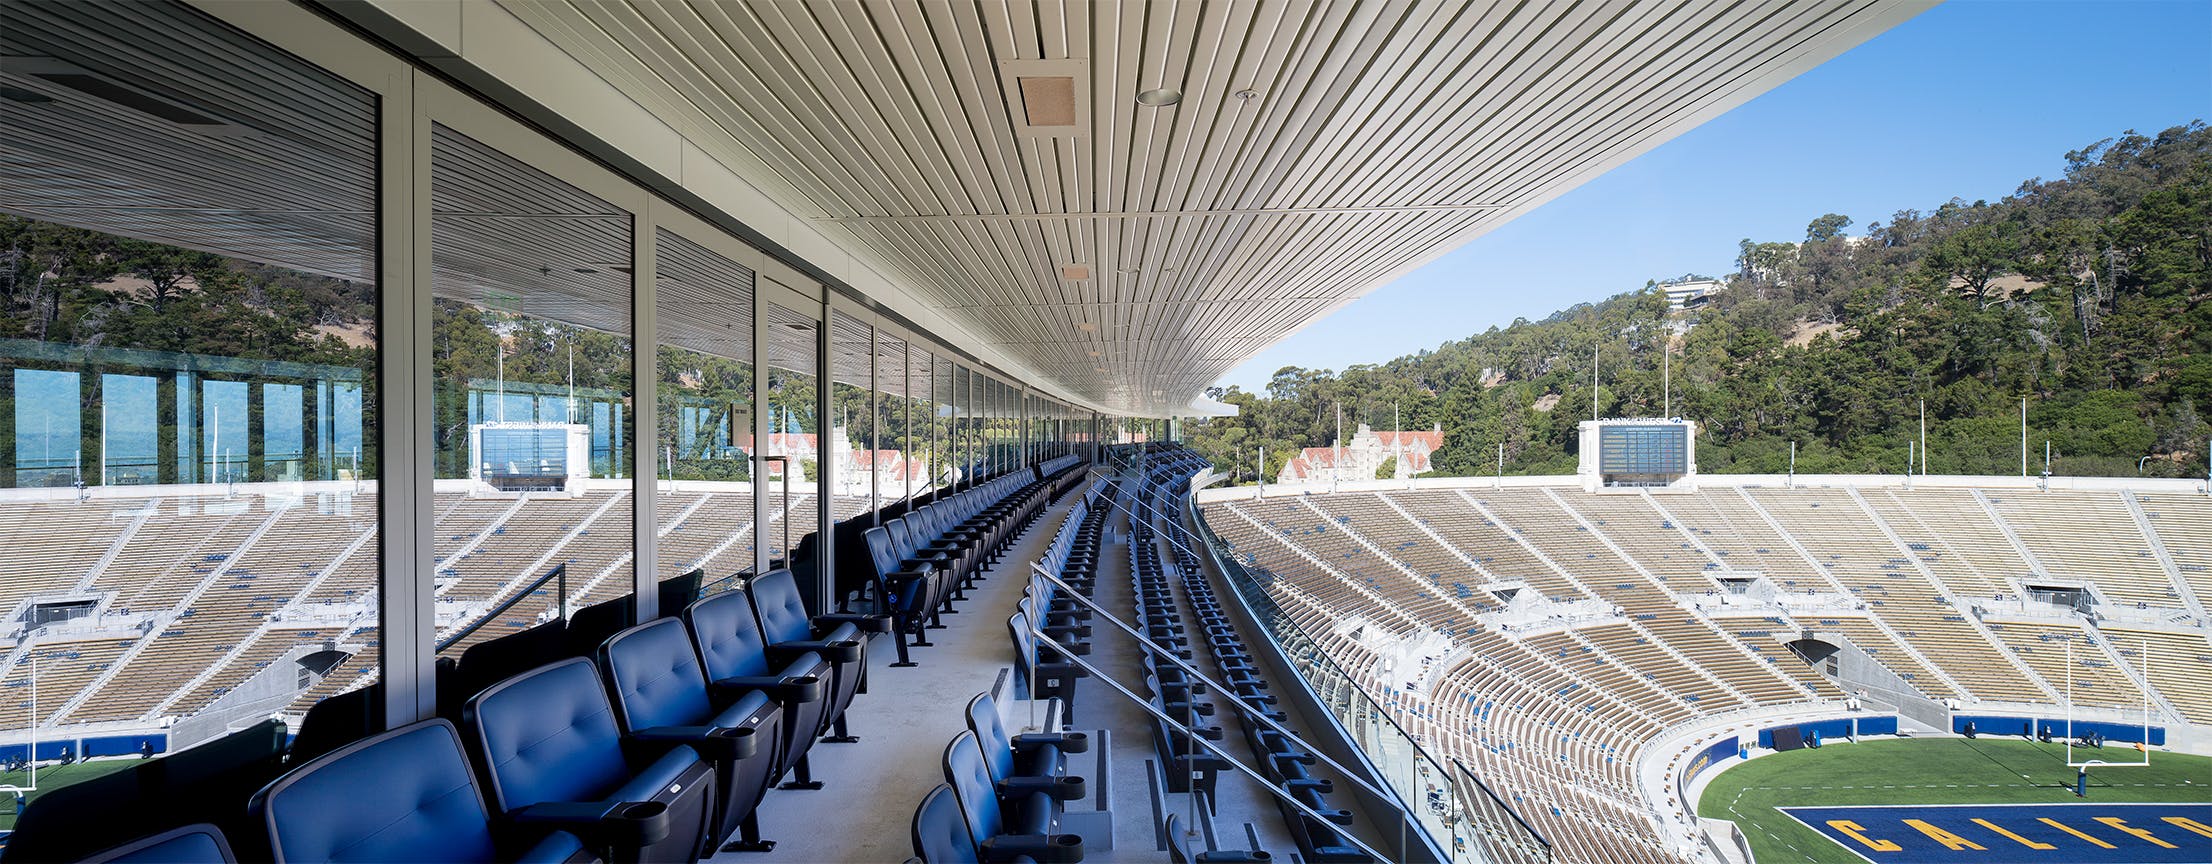 Cal Stadium with NanaWall sliding glass wall systems